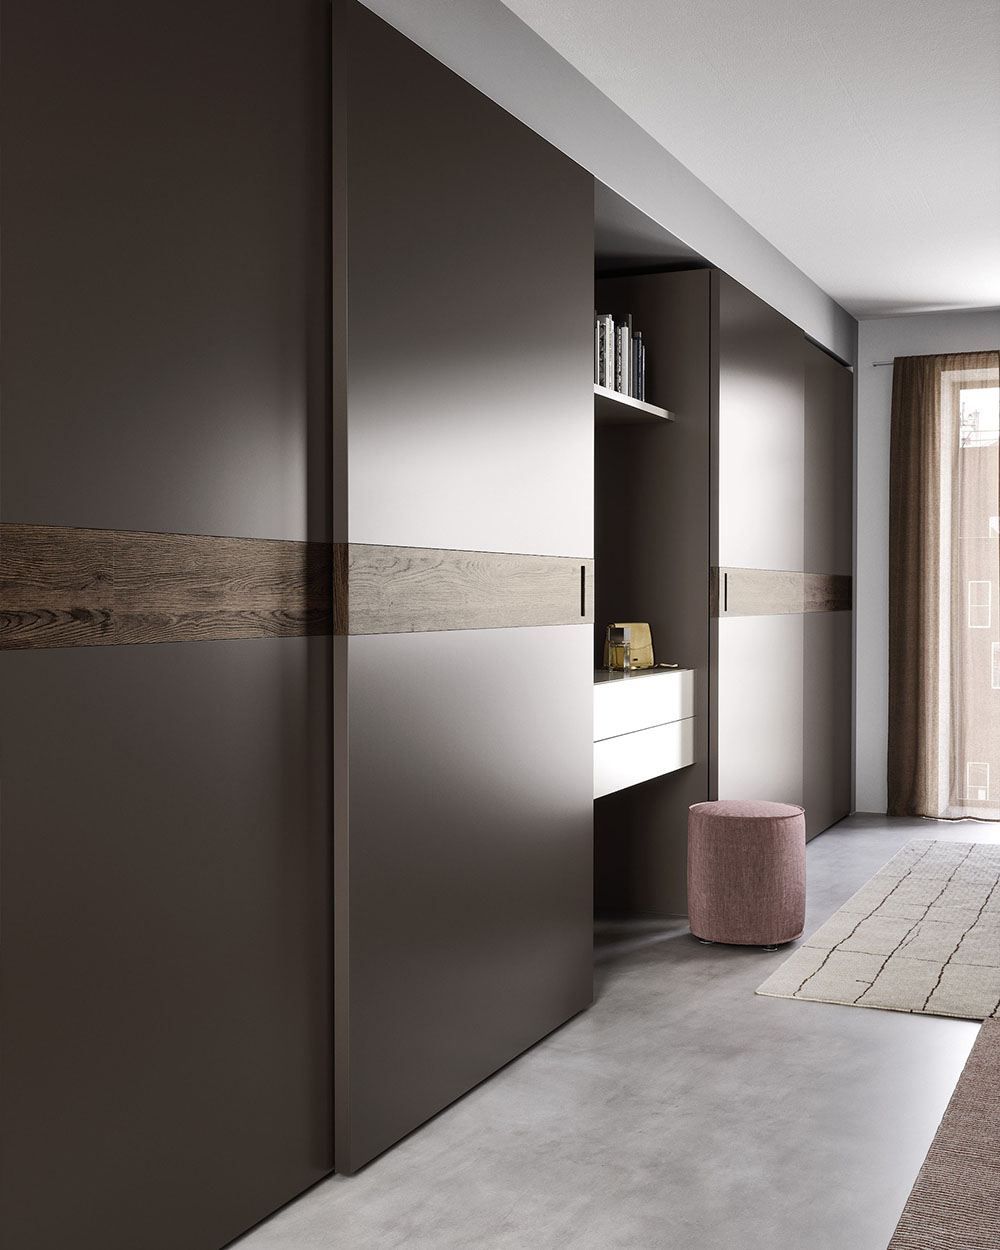 Handcrafted wooden luxury Italian sliding wardrobe with high quality wood. Designed and installed by Krieder for your modern home.